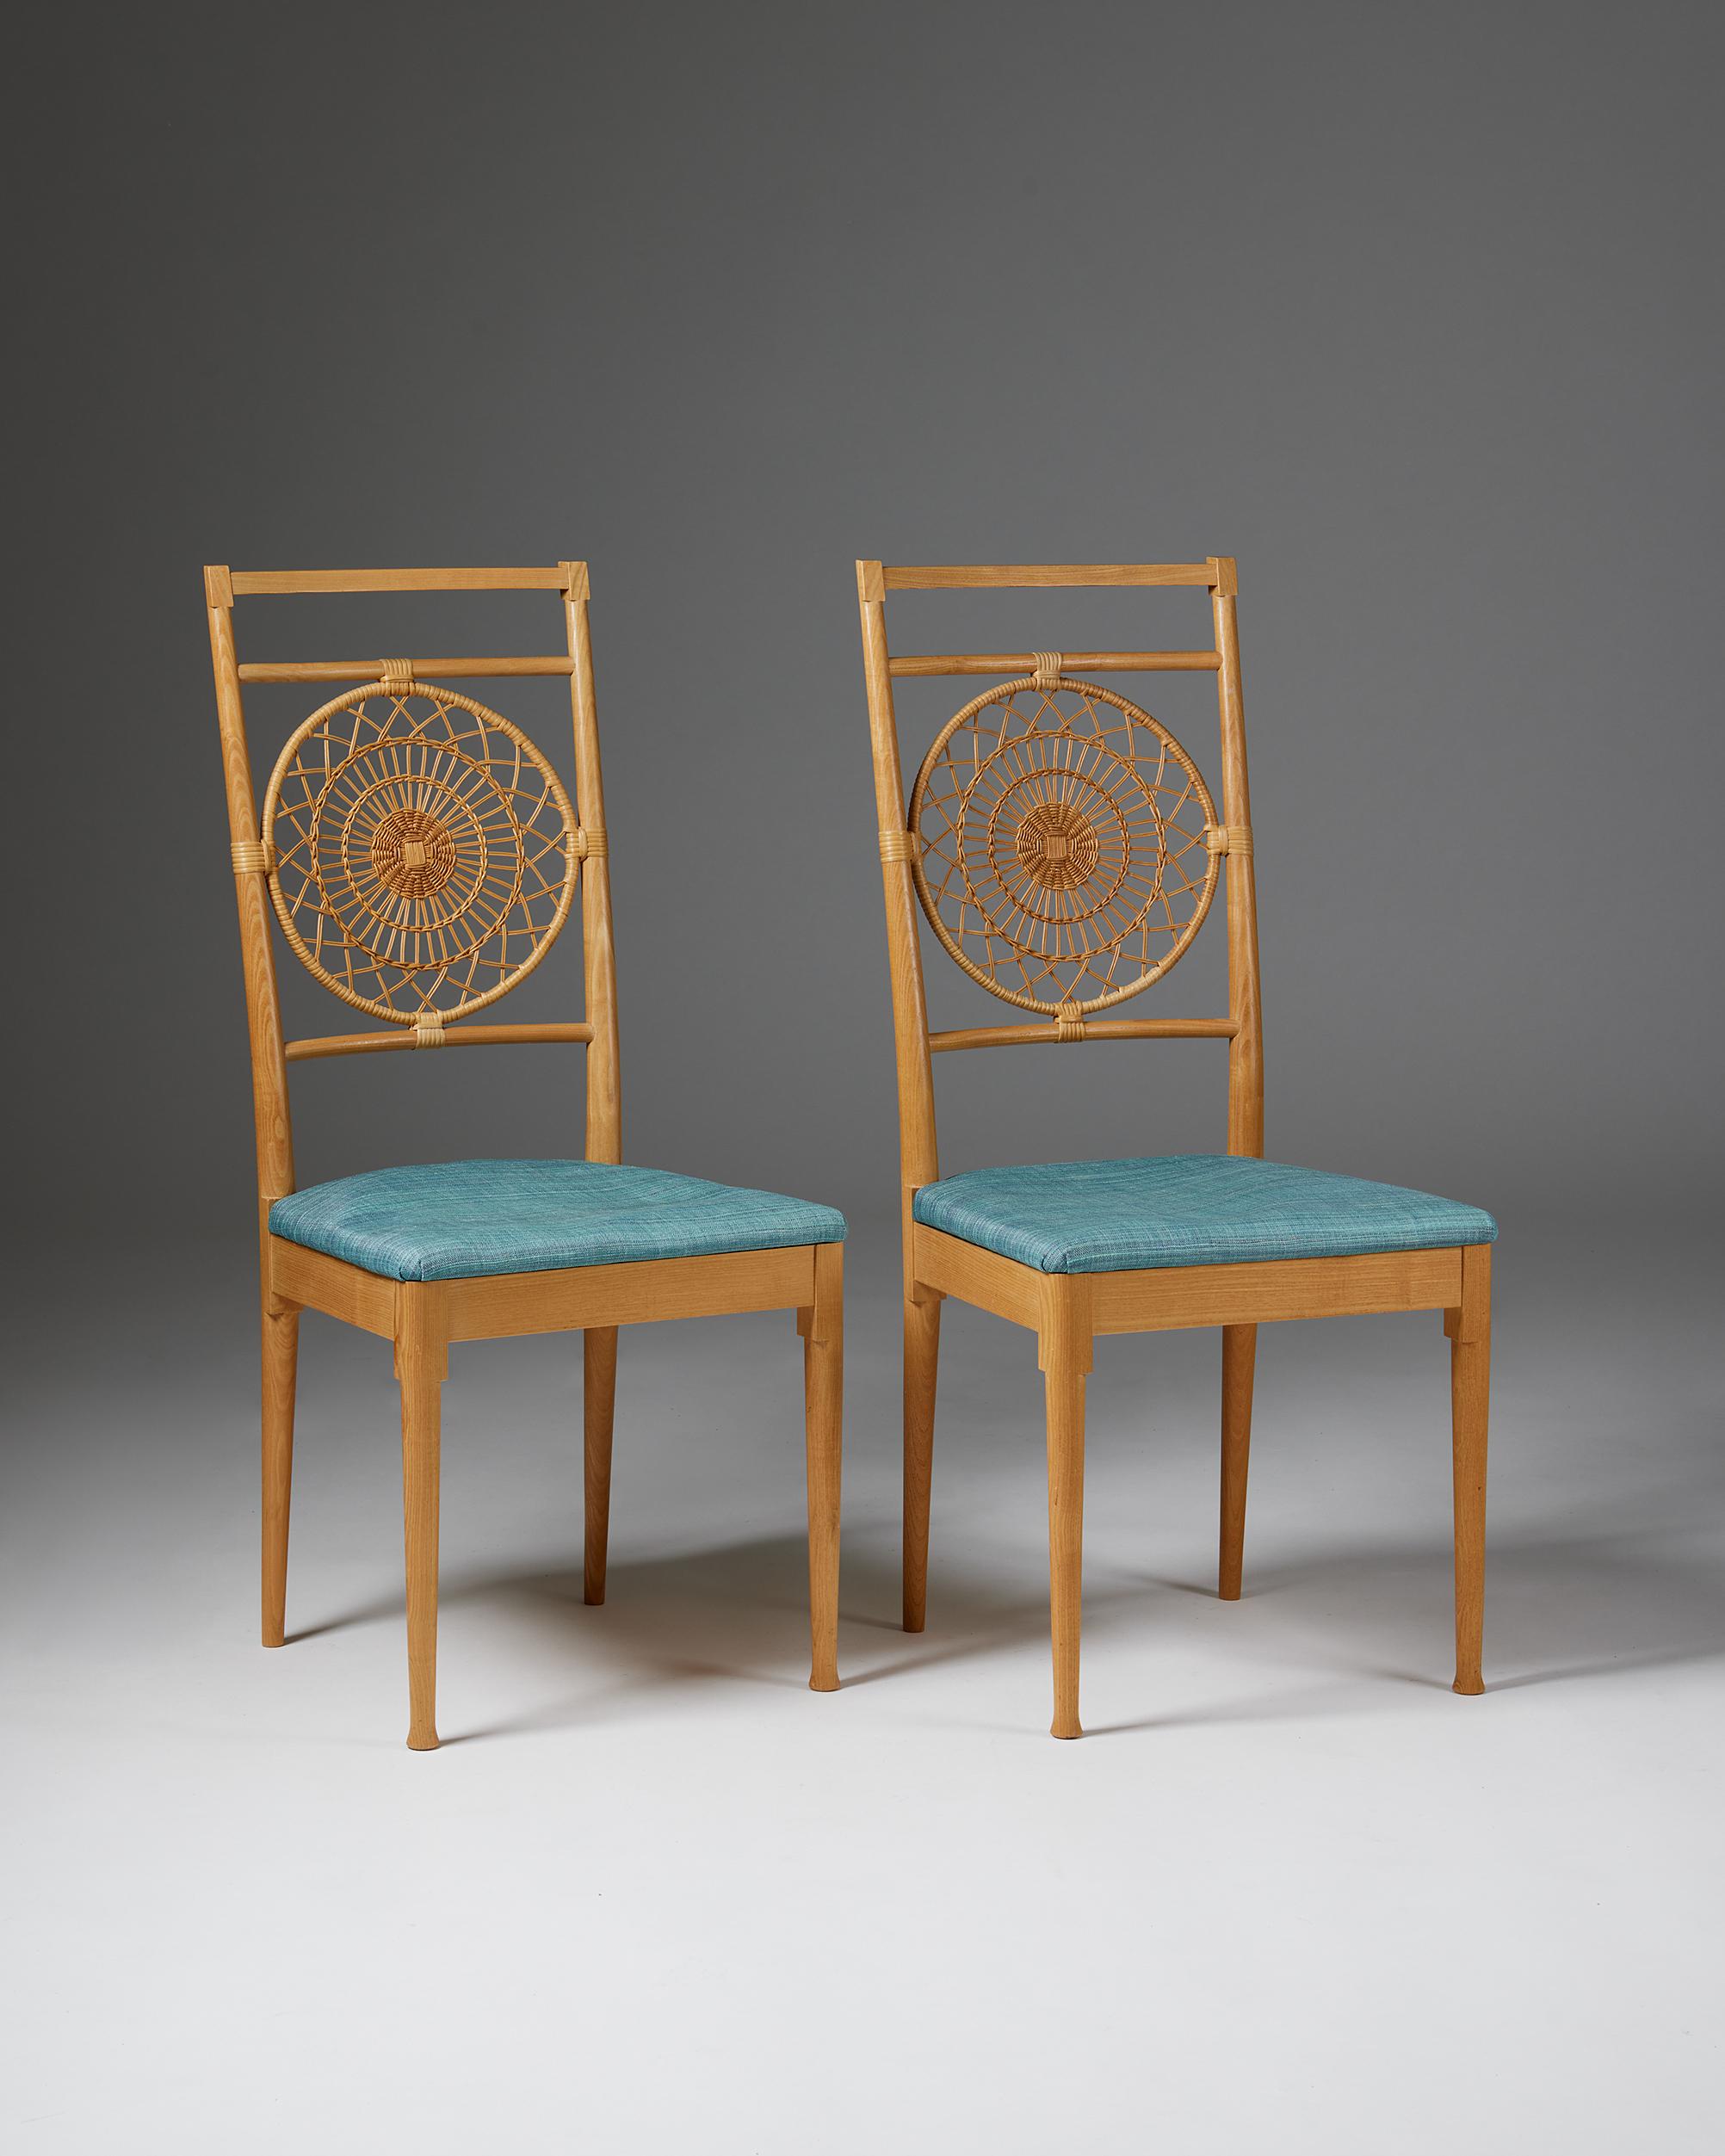 Pair of chairs designed by Carin Chambert and Sigbritt Larsson for Torsten Schollin,
Sweden. 1960s.
Elm, rattan and upholstery.

Stamped.

The model won first prize in the Crafts, Furniture Industry Association, SAR, SIR and Swedish Handicraft